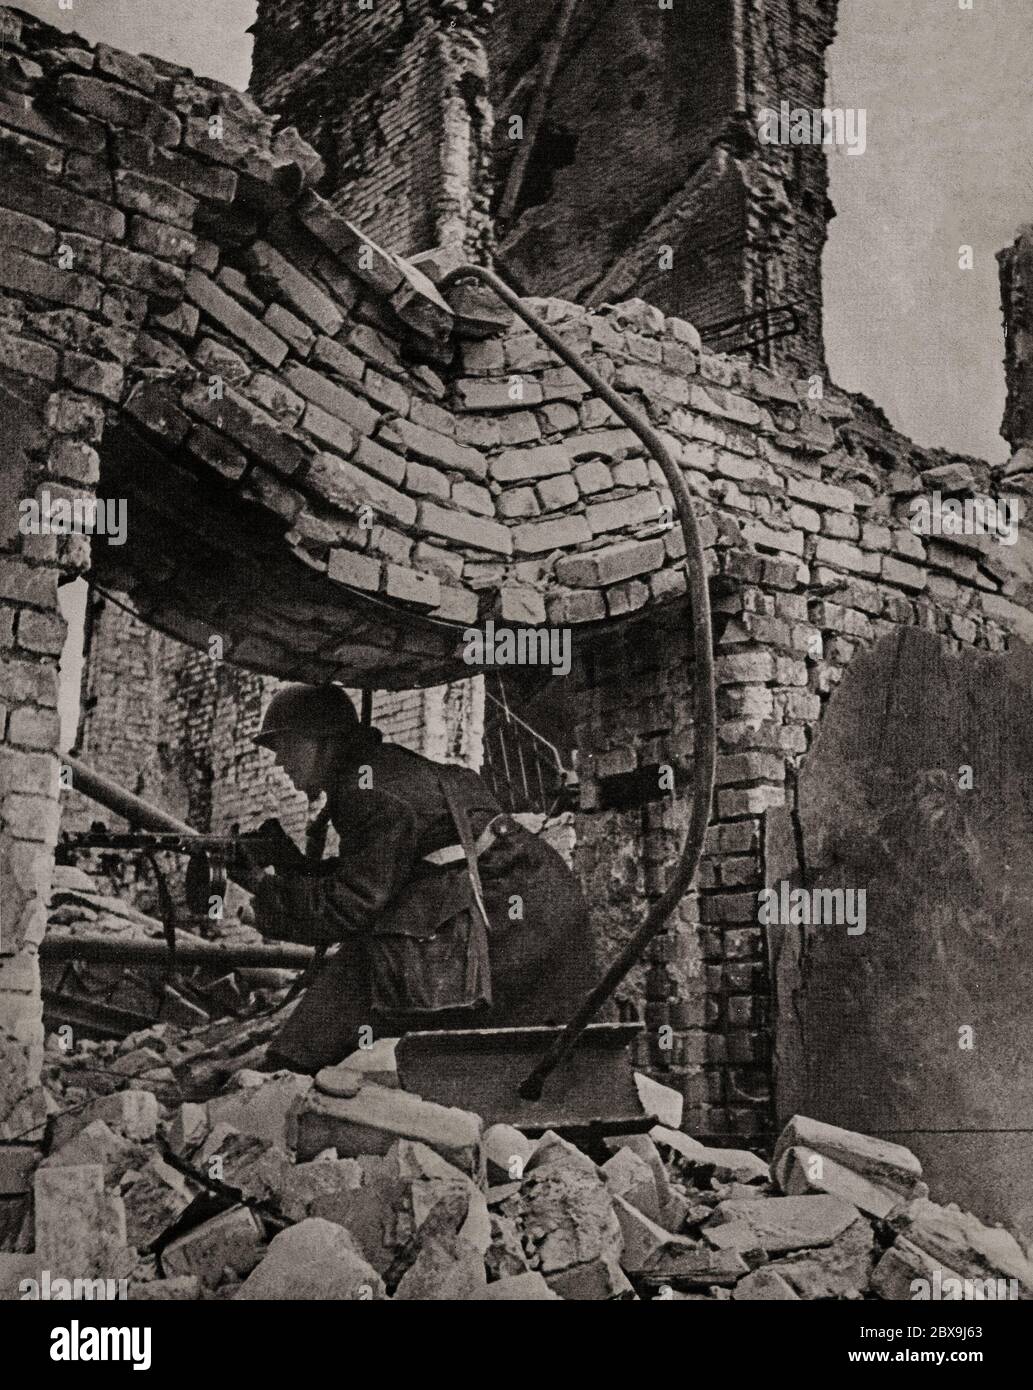 A German soldier in house to house fighting during the Battle of Stalingrad (1942-1943), when Germany and its allies fought the Soviet Union for control of the city of Stalingrad (now Volgograd) in Southern Russia. It was marked by fierce close-quarters combat and direct assaults on civilians in air raids during one of the bloodiest battles in the history of warfare, with an estimated 2 million total casualties. Stock Photo